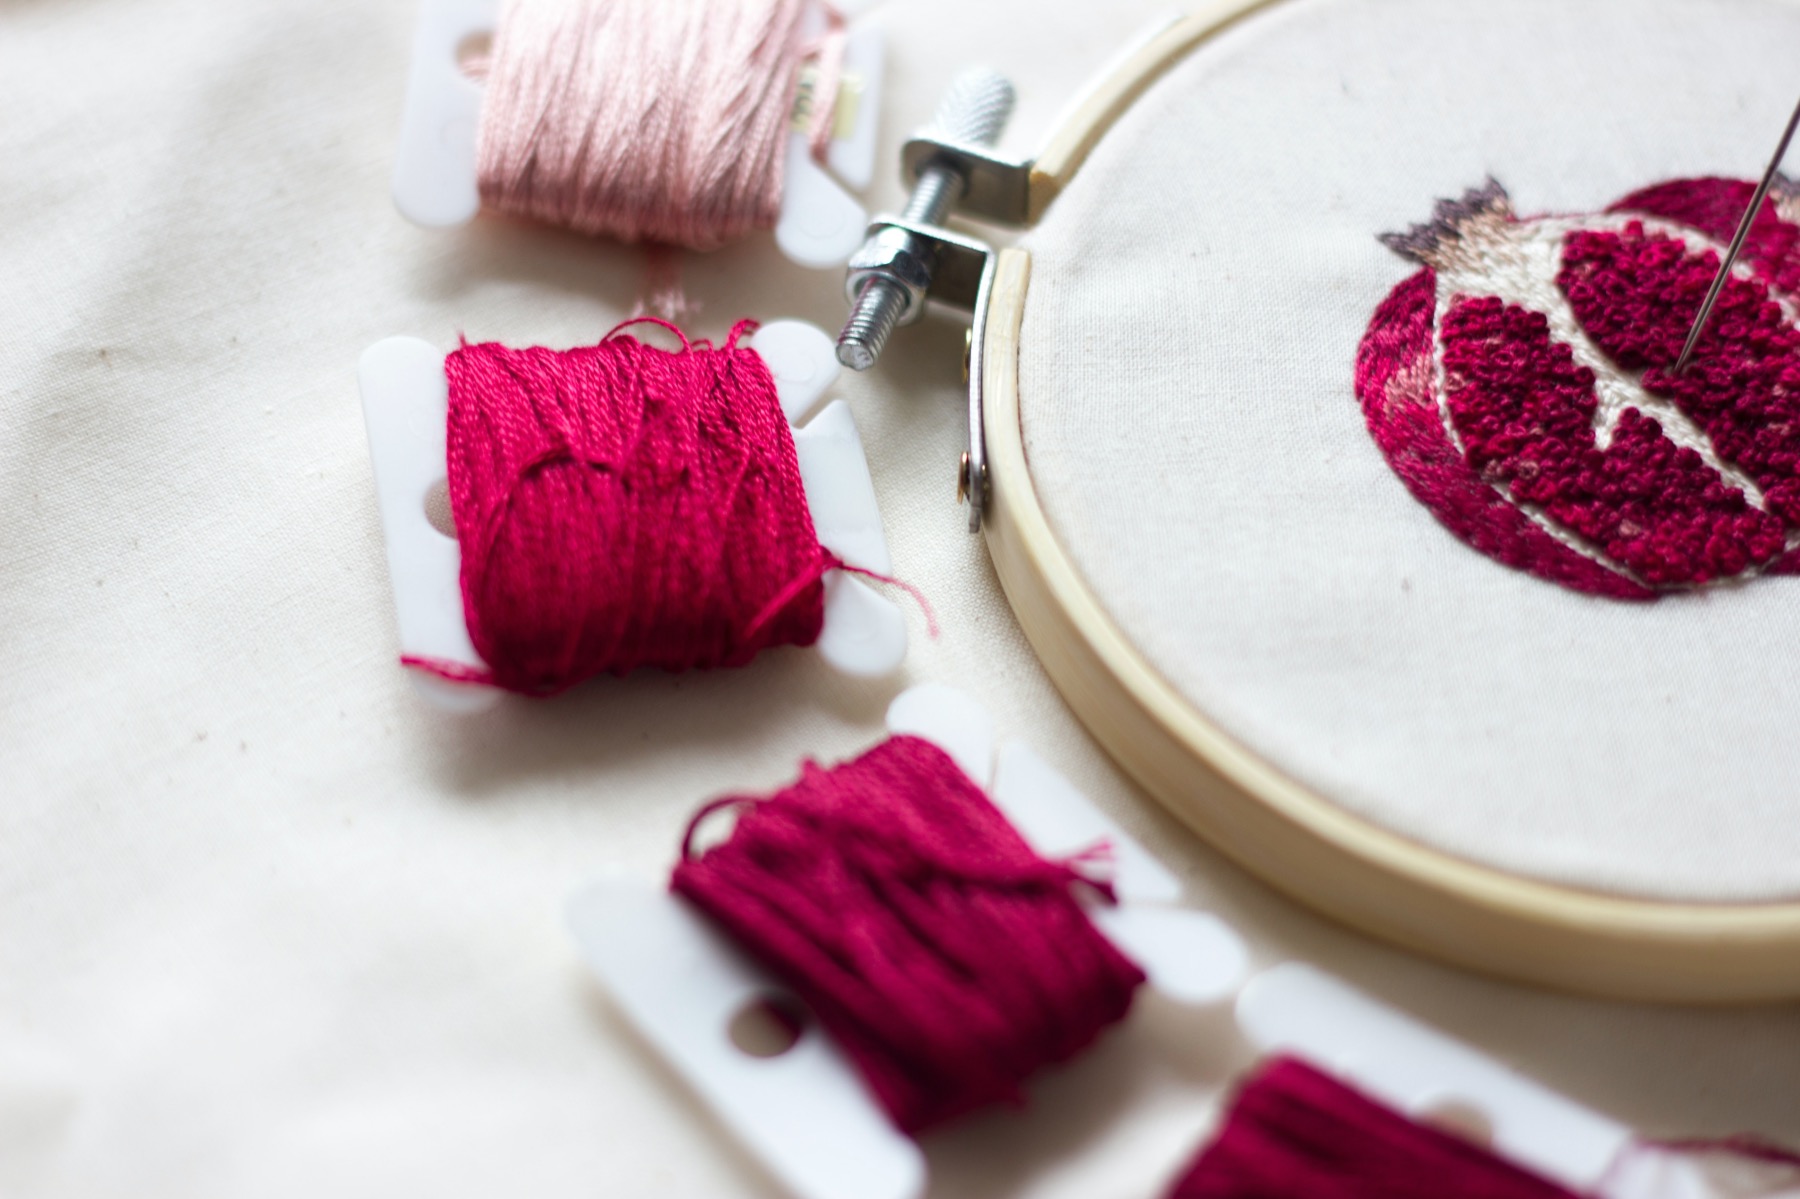 fabric to stitch on embroidery beginners guide